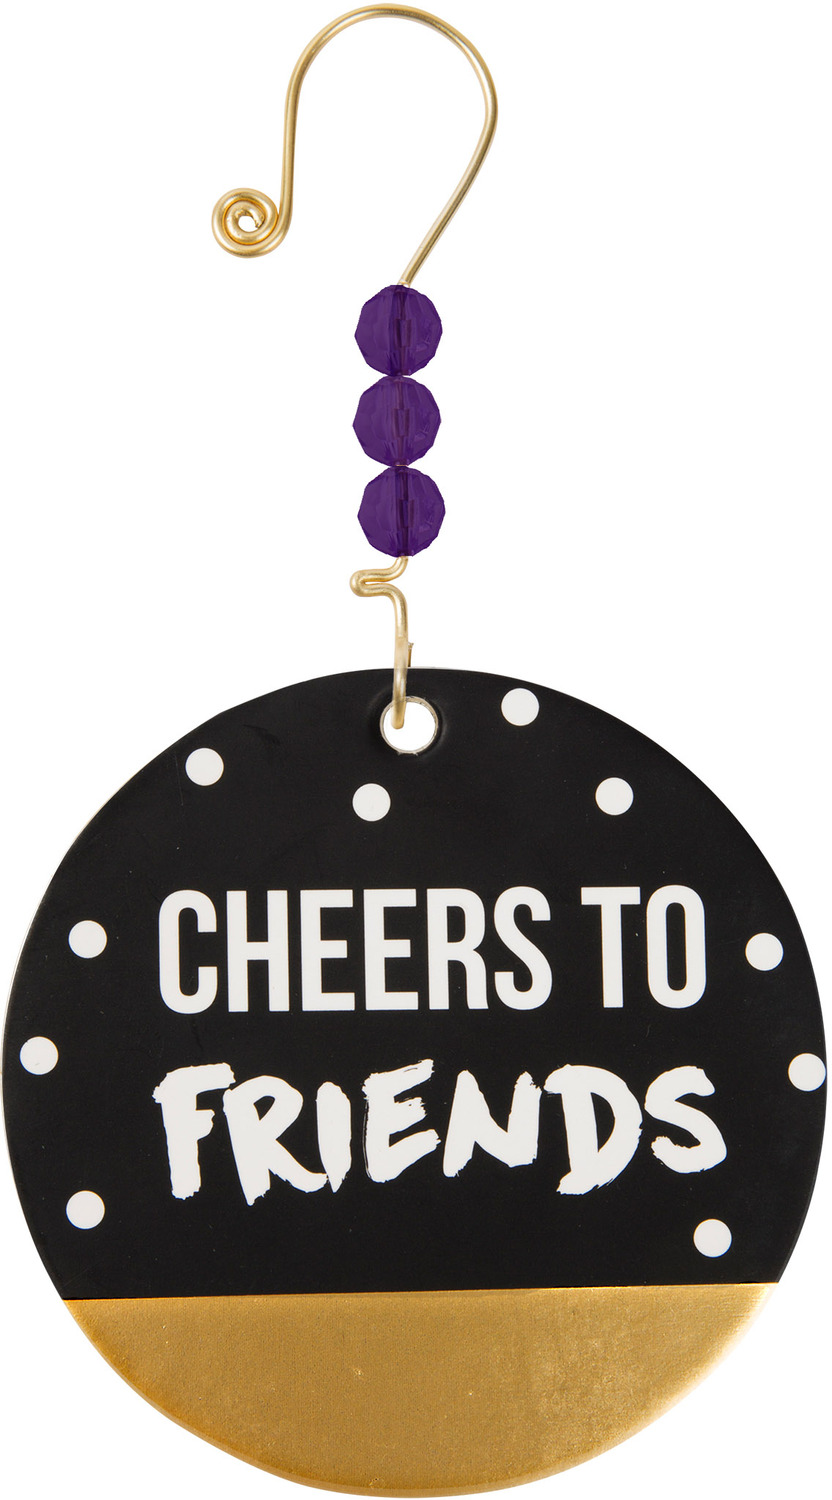 Cheers to Friends by Girlfinds - Cheers to Friends - 3.5" Paper Ornament